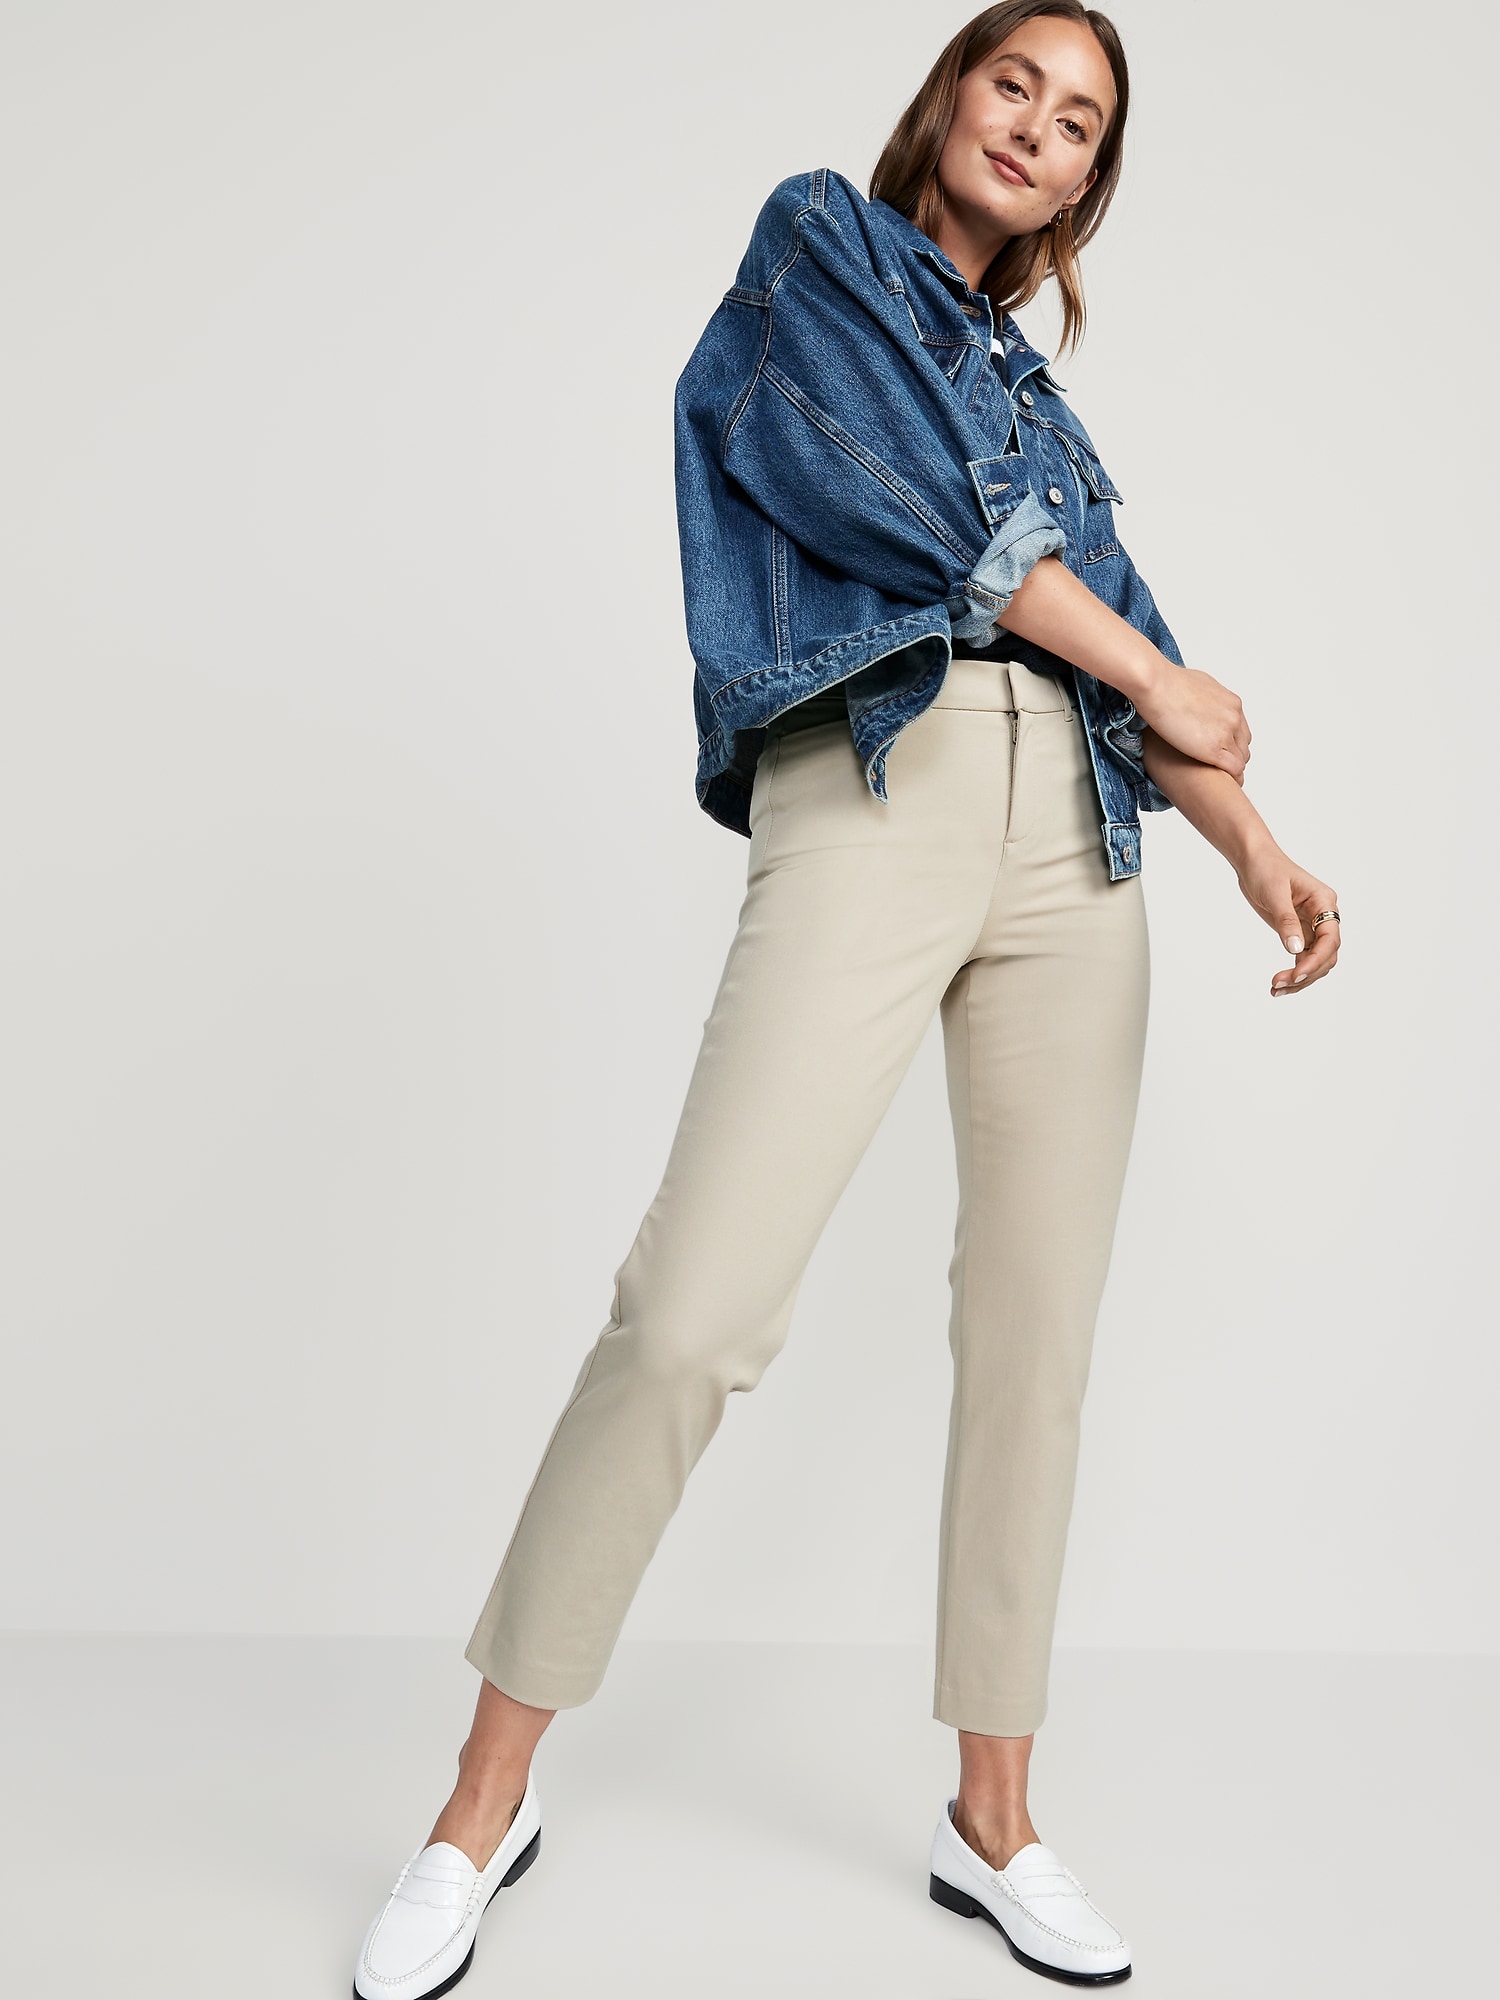 Old Navy Pixie Pants On Sale! $20 Styles Today ONLY!